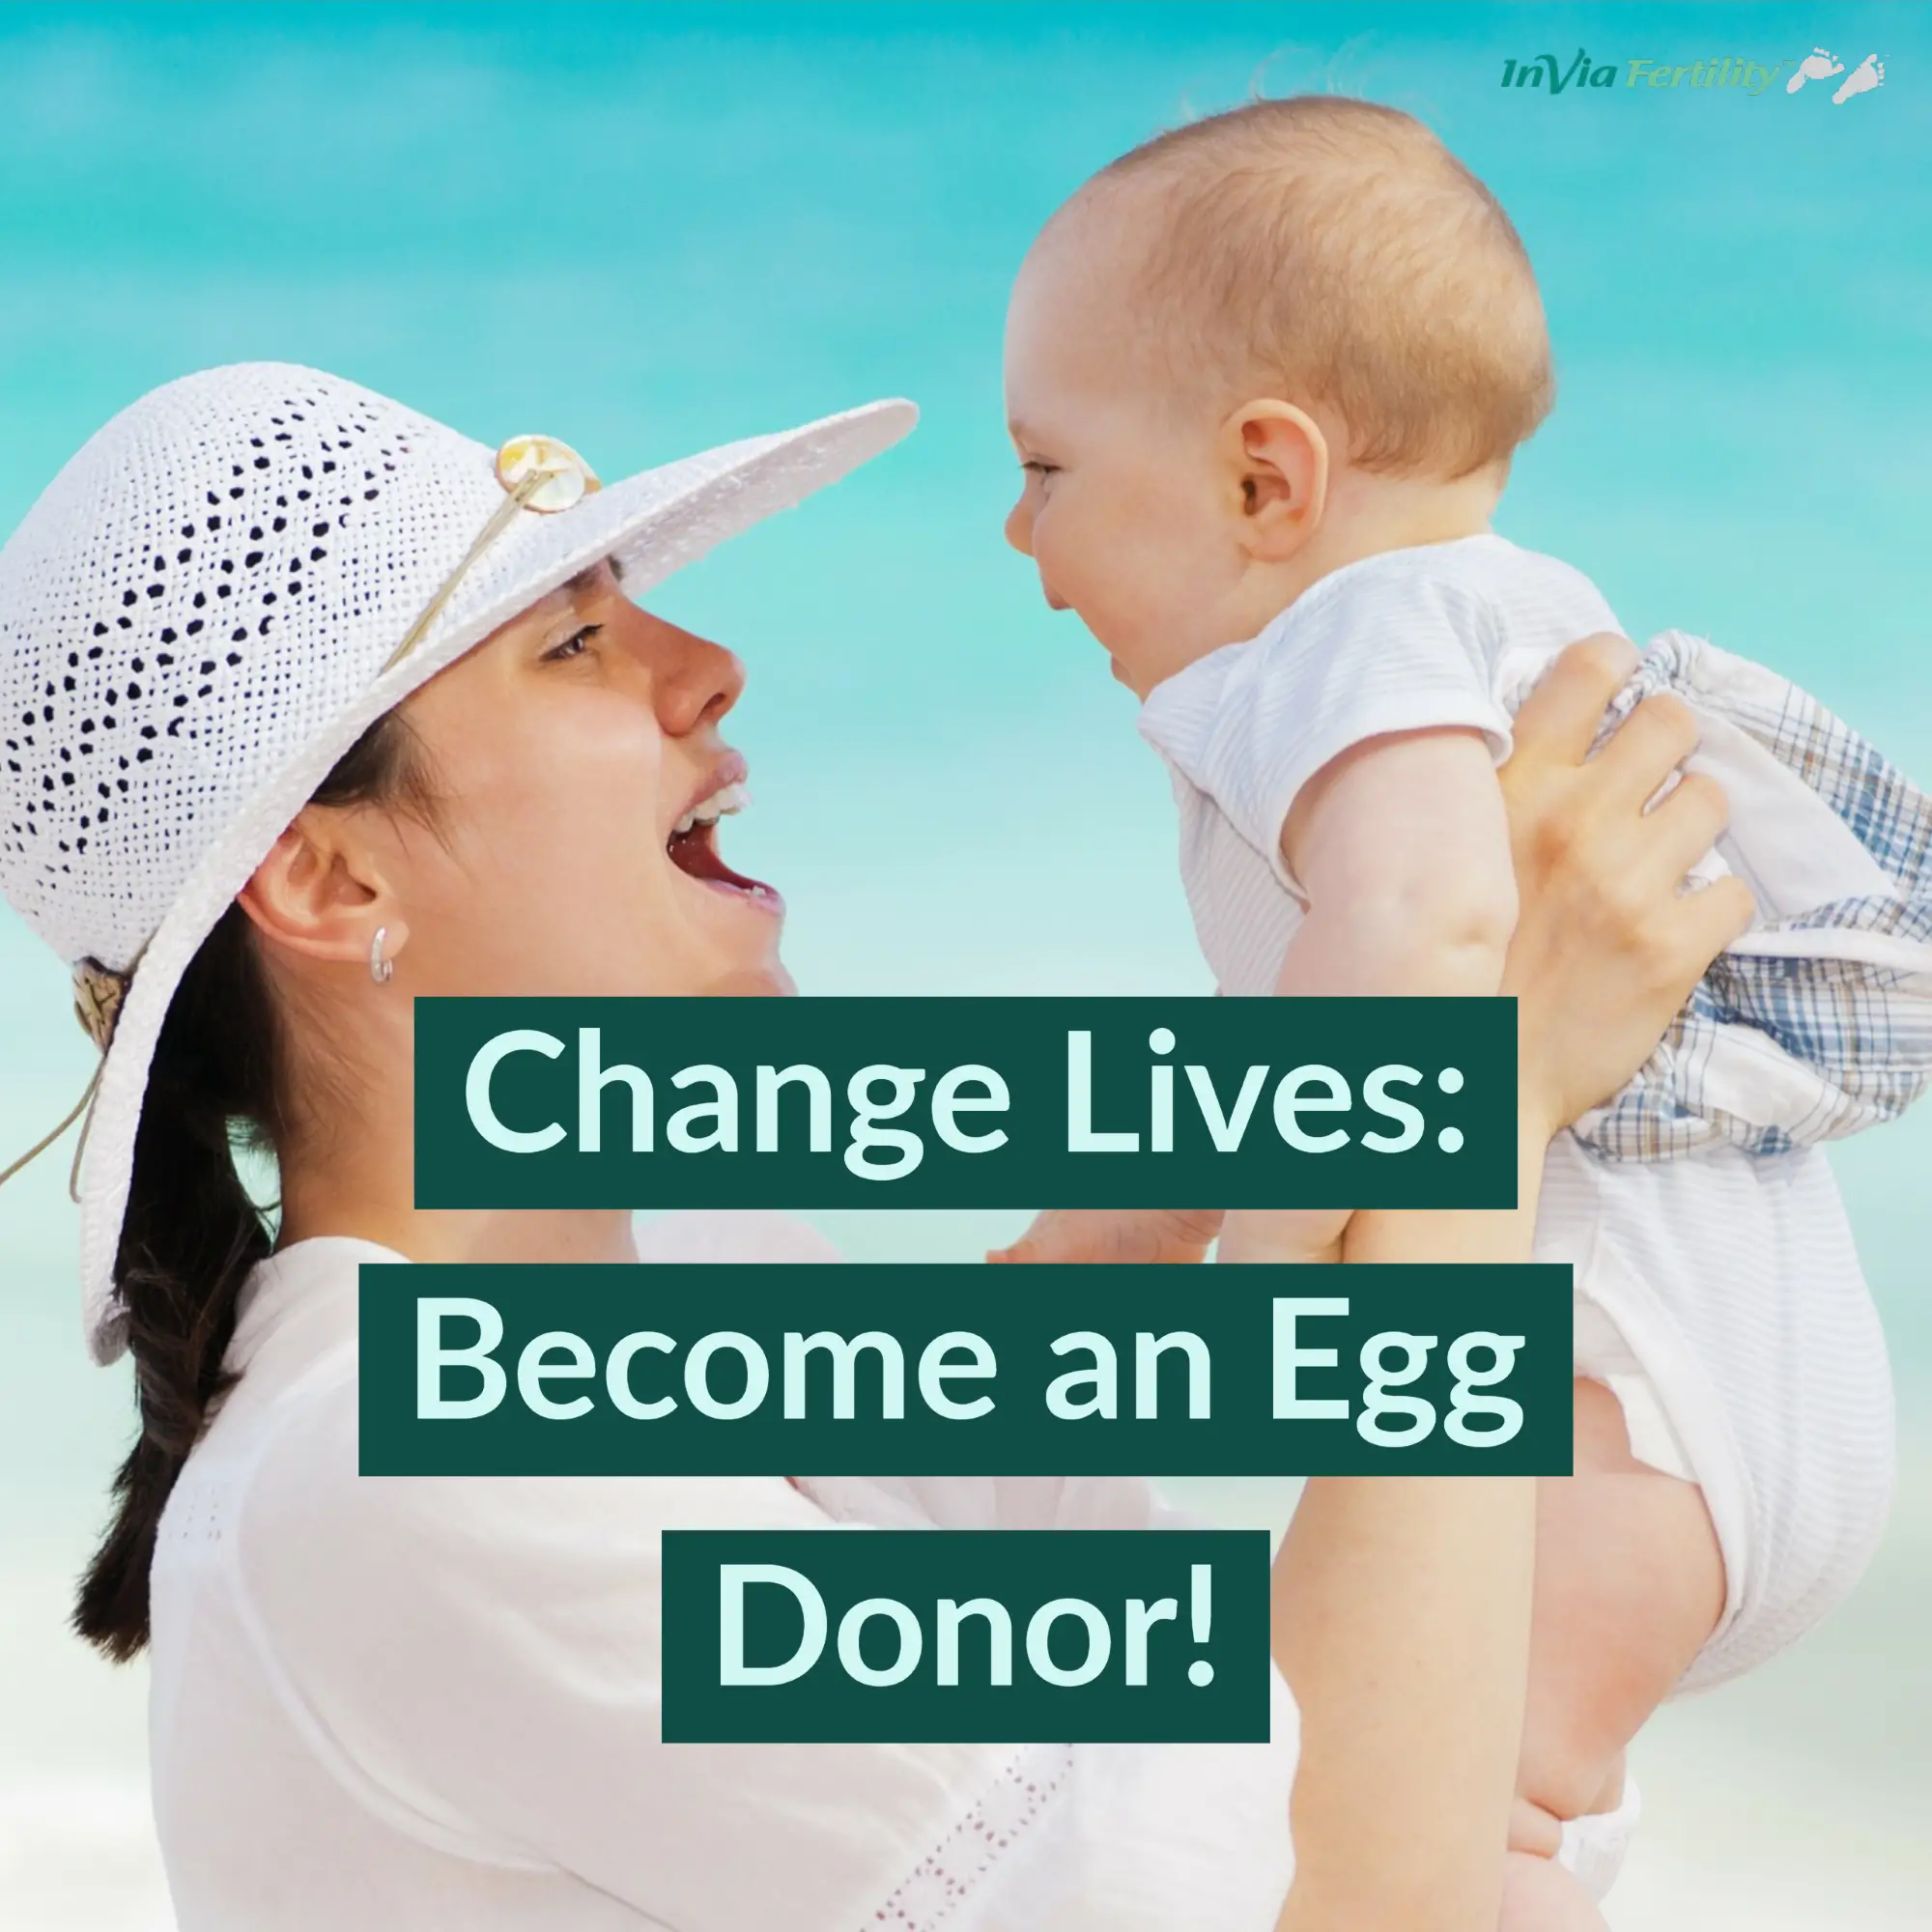 Change Lives as an Egg Donor!